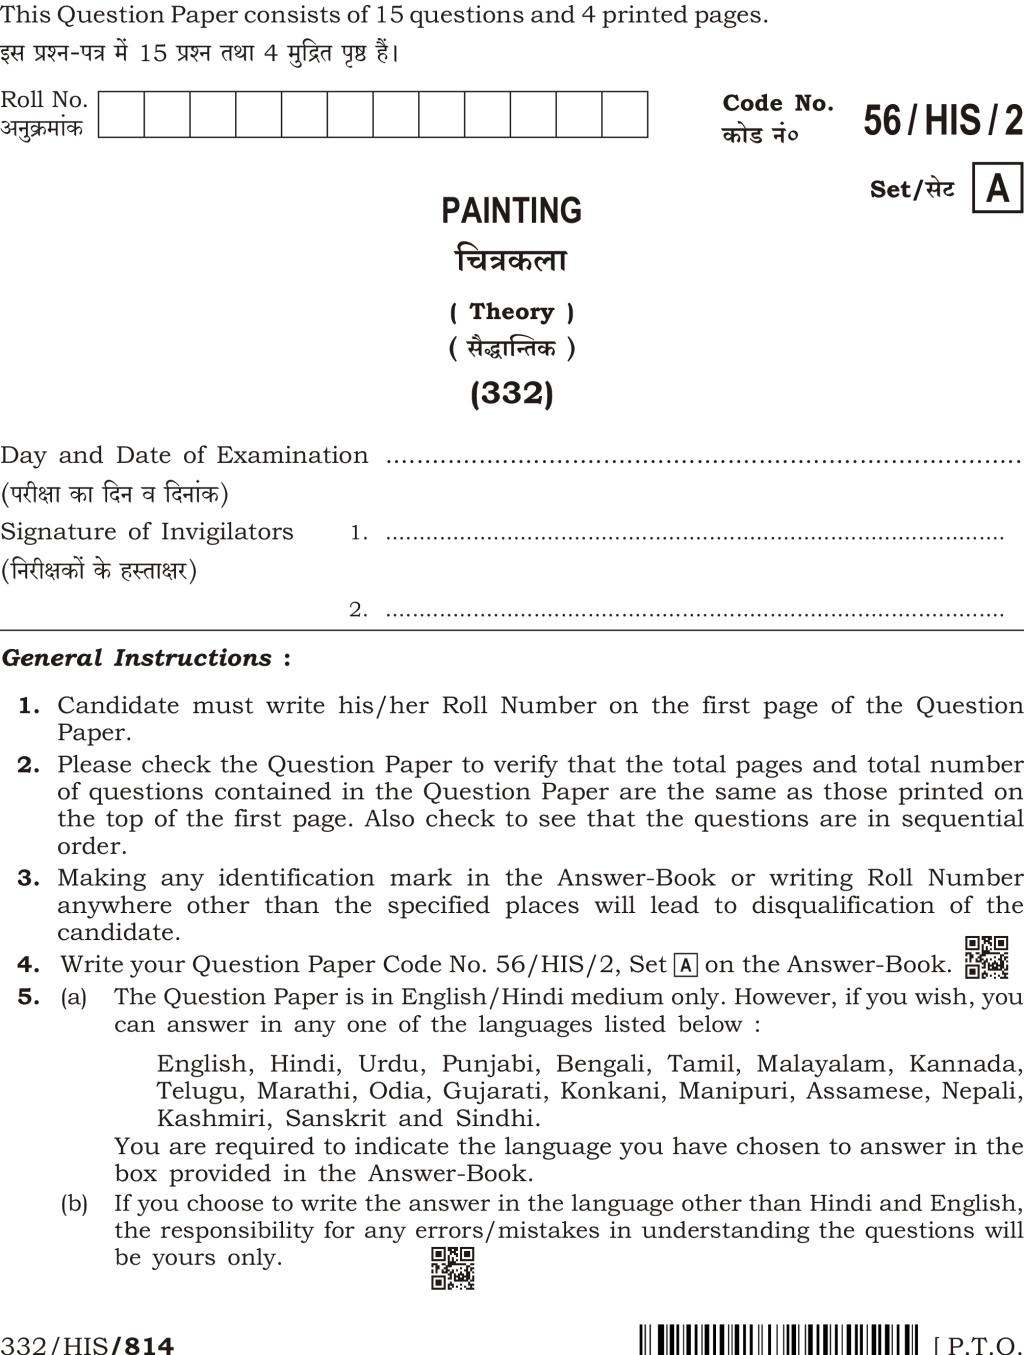 NIOS Class 12 Question Paper Apr 2018 - Painting - Page 1